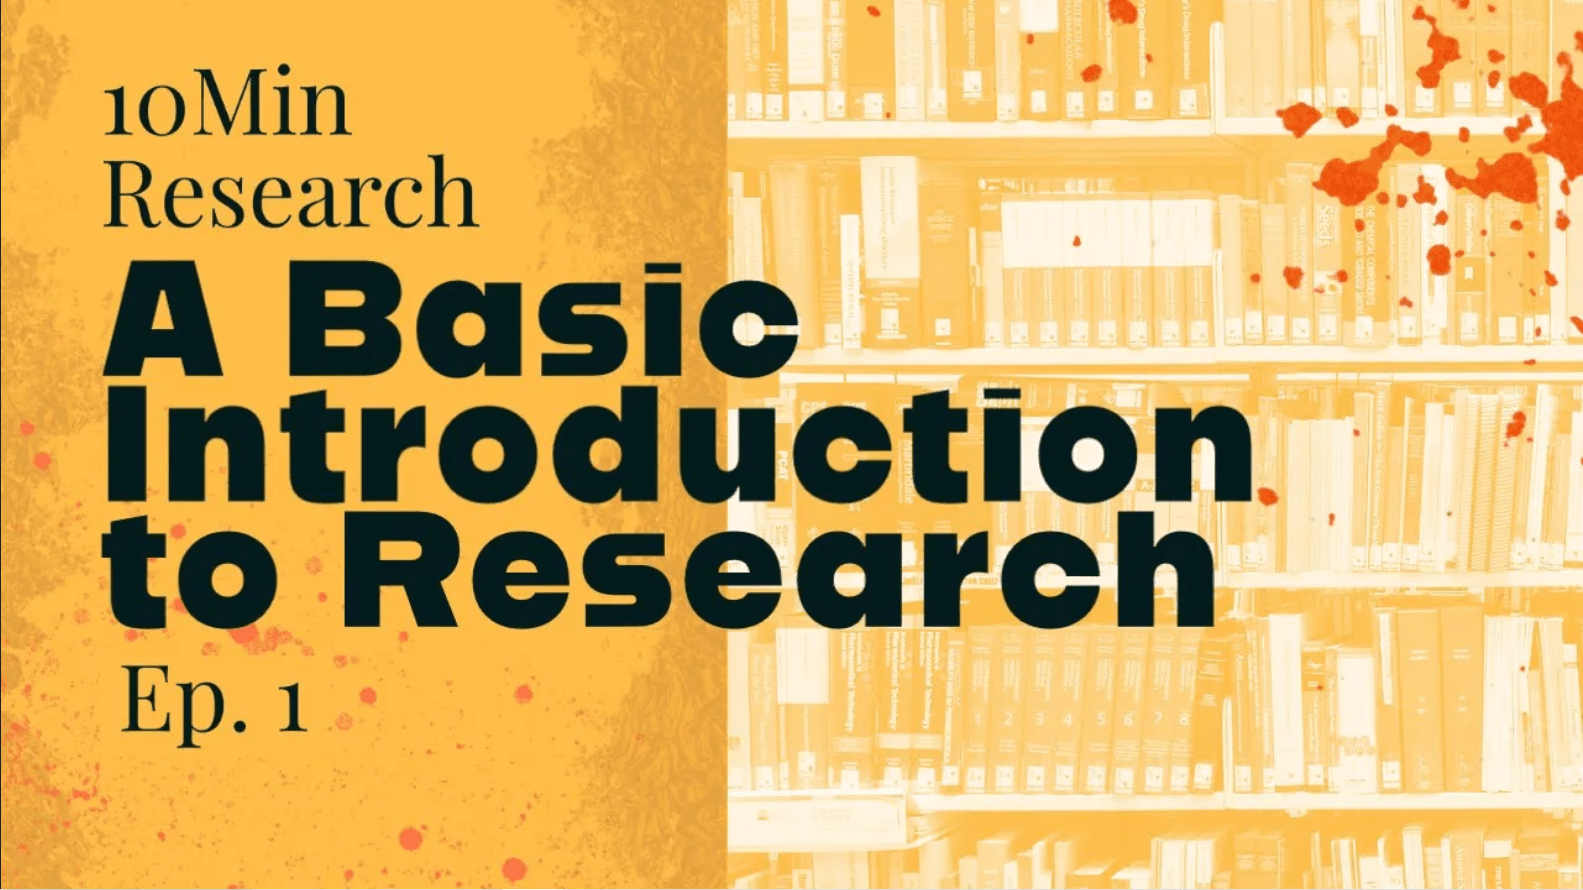 1. Introduction to Research